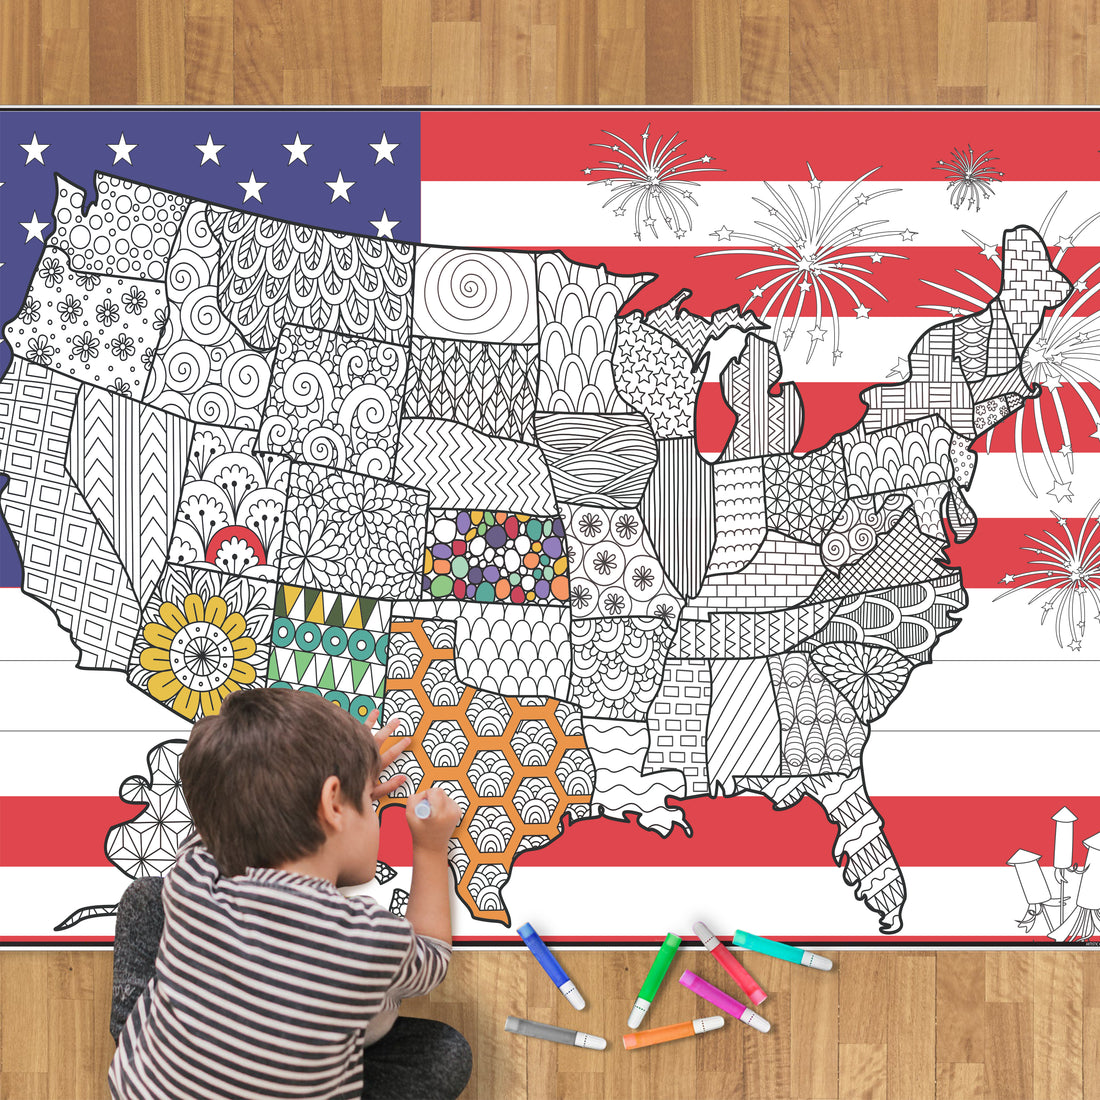 boy sitting down and coloring a giant coloring page that has a USA map with USA flag in the background.